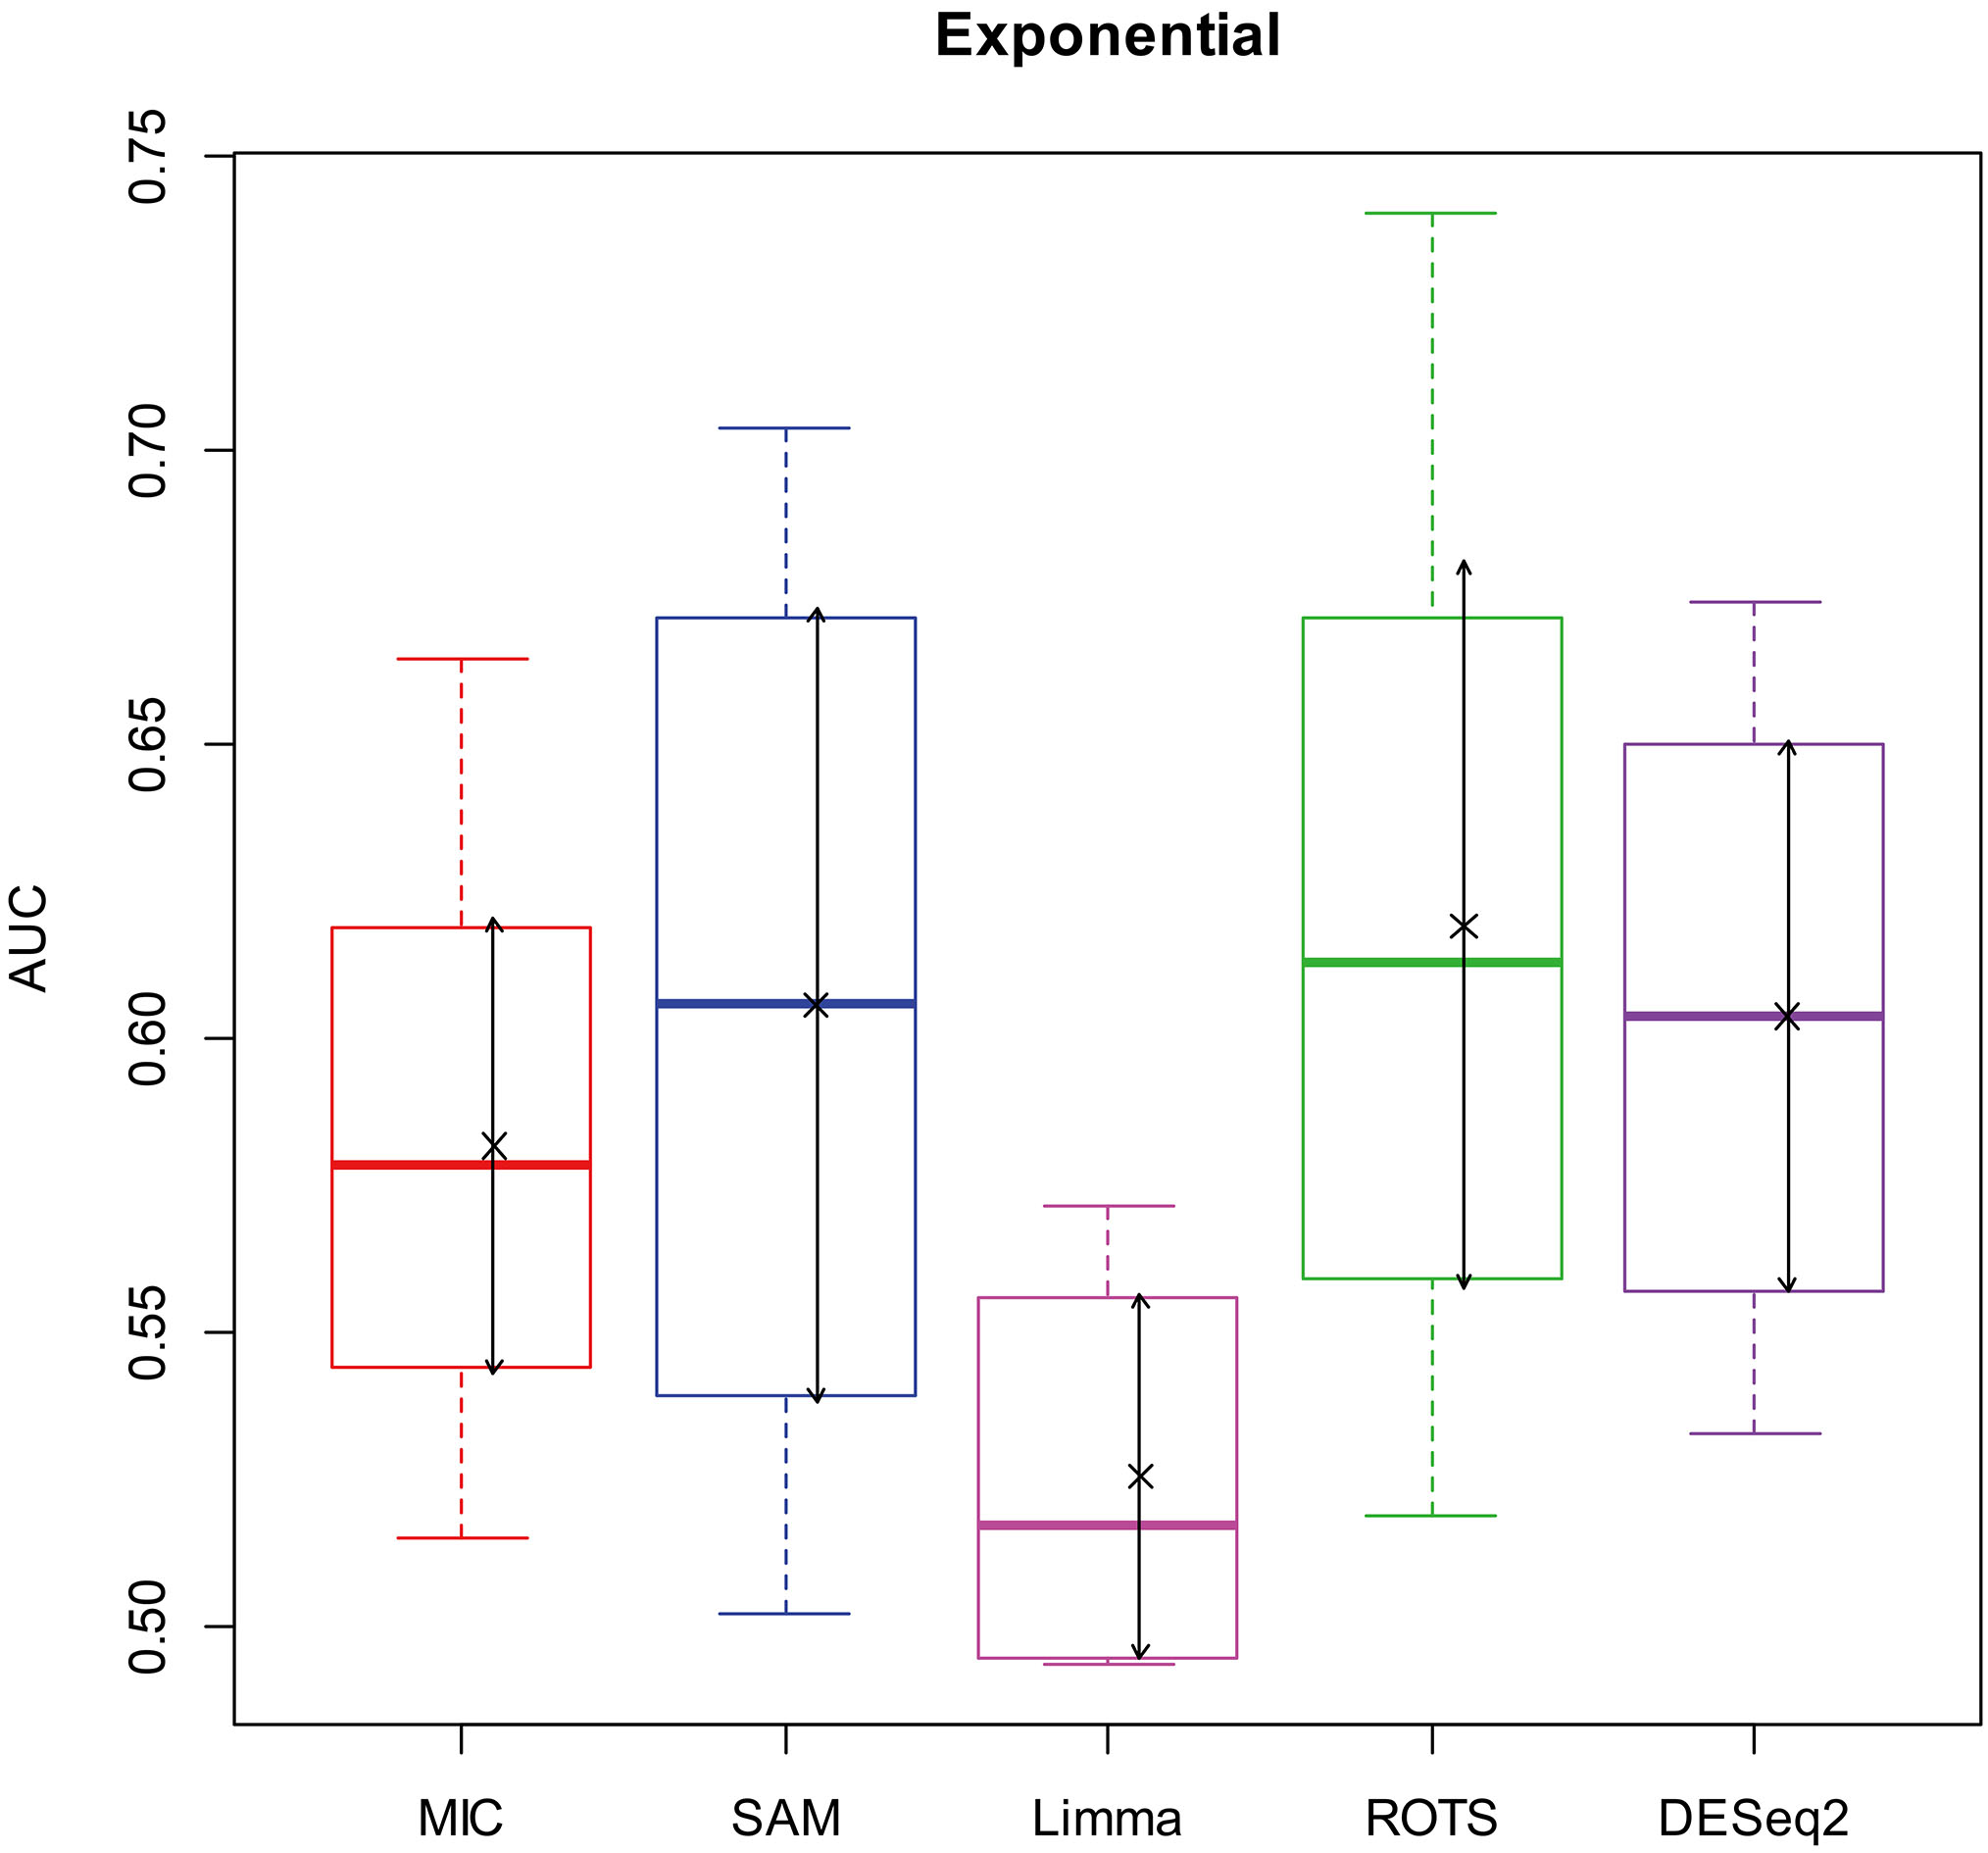 AUC boxplot on exponential data. “×”s are the means. Bidirectional arrows represent ± 1 σ.